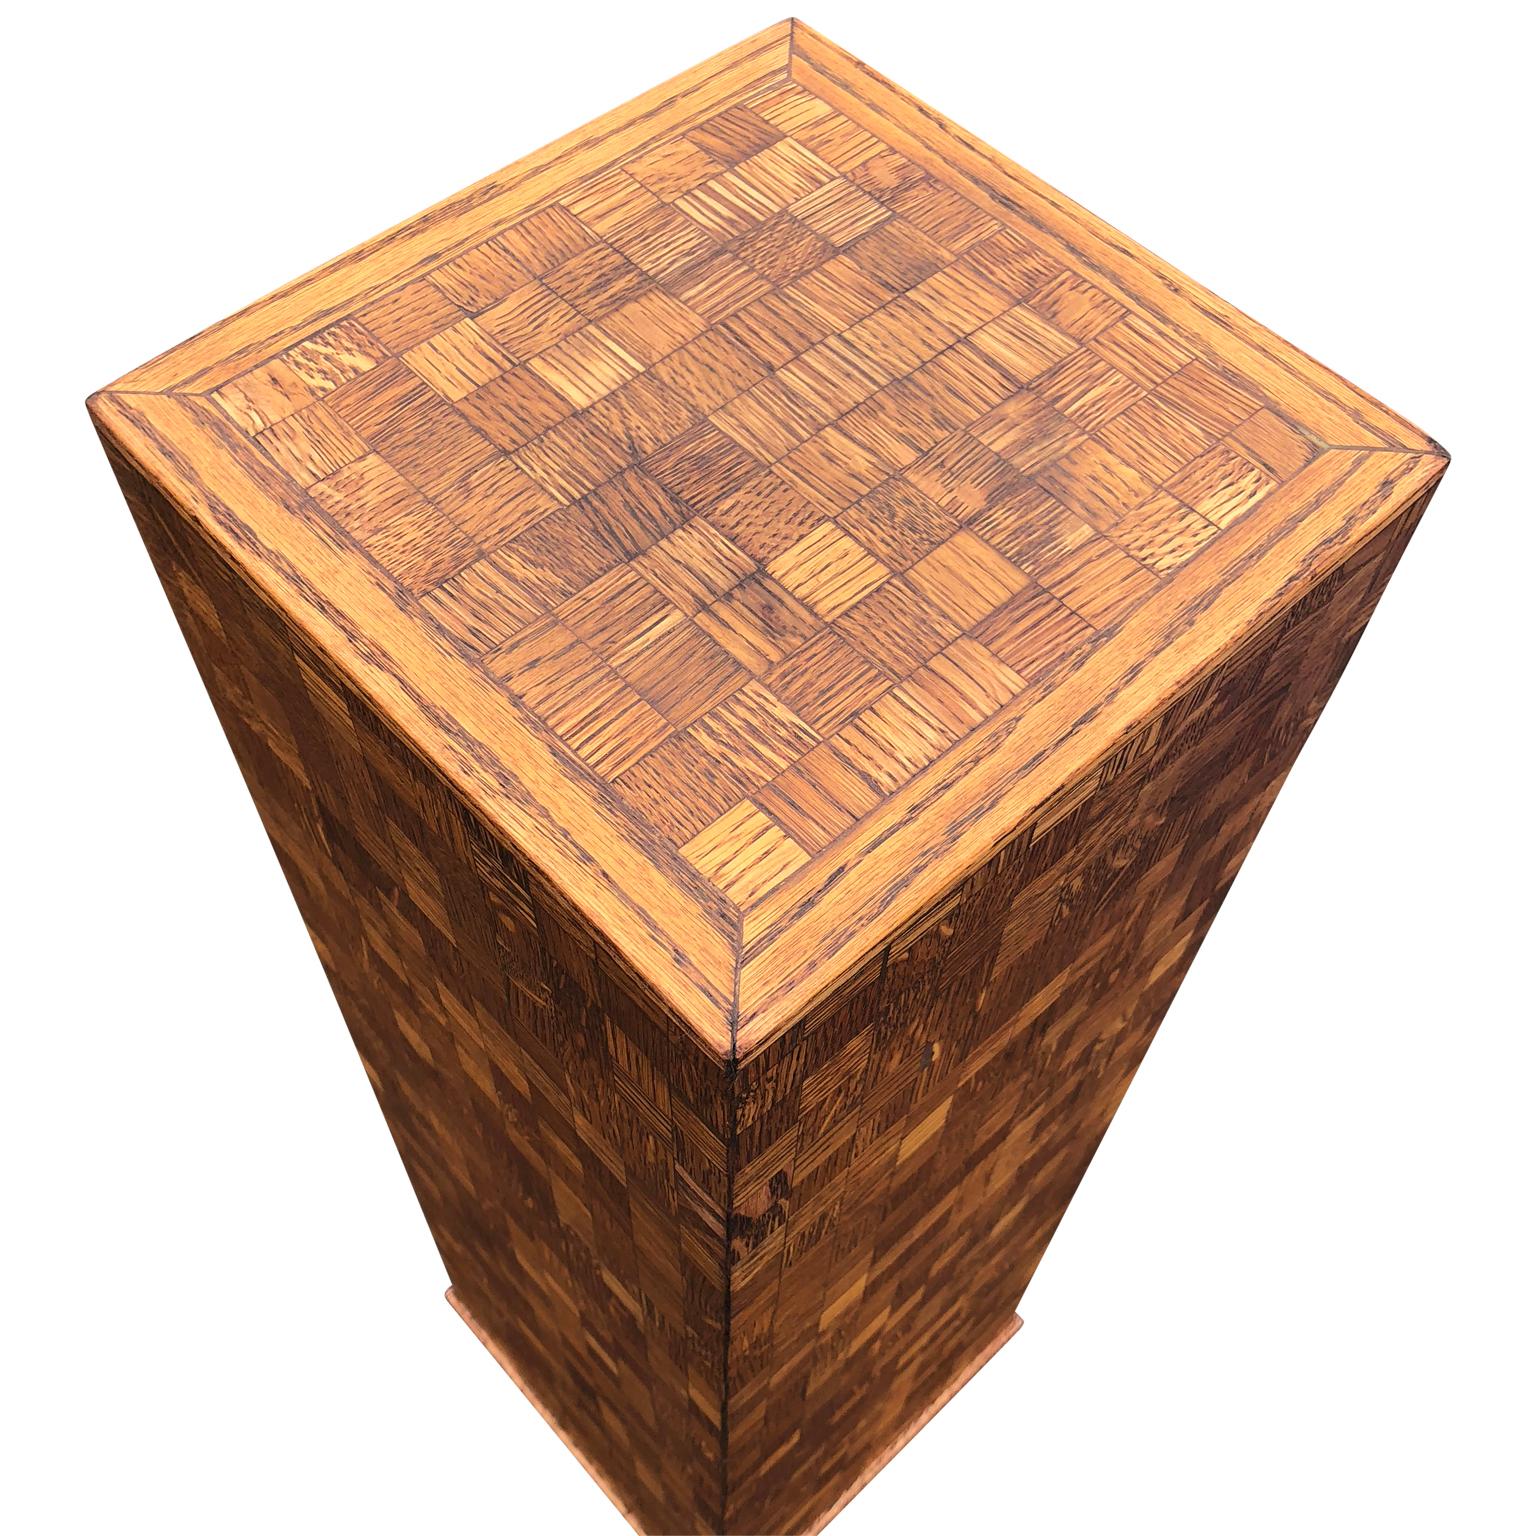 Square Mid-Century Modern wooden pedestal with mosaic wooden tile design.